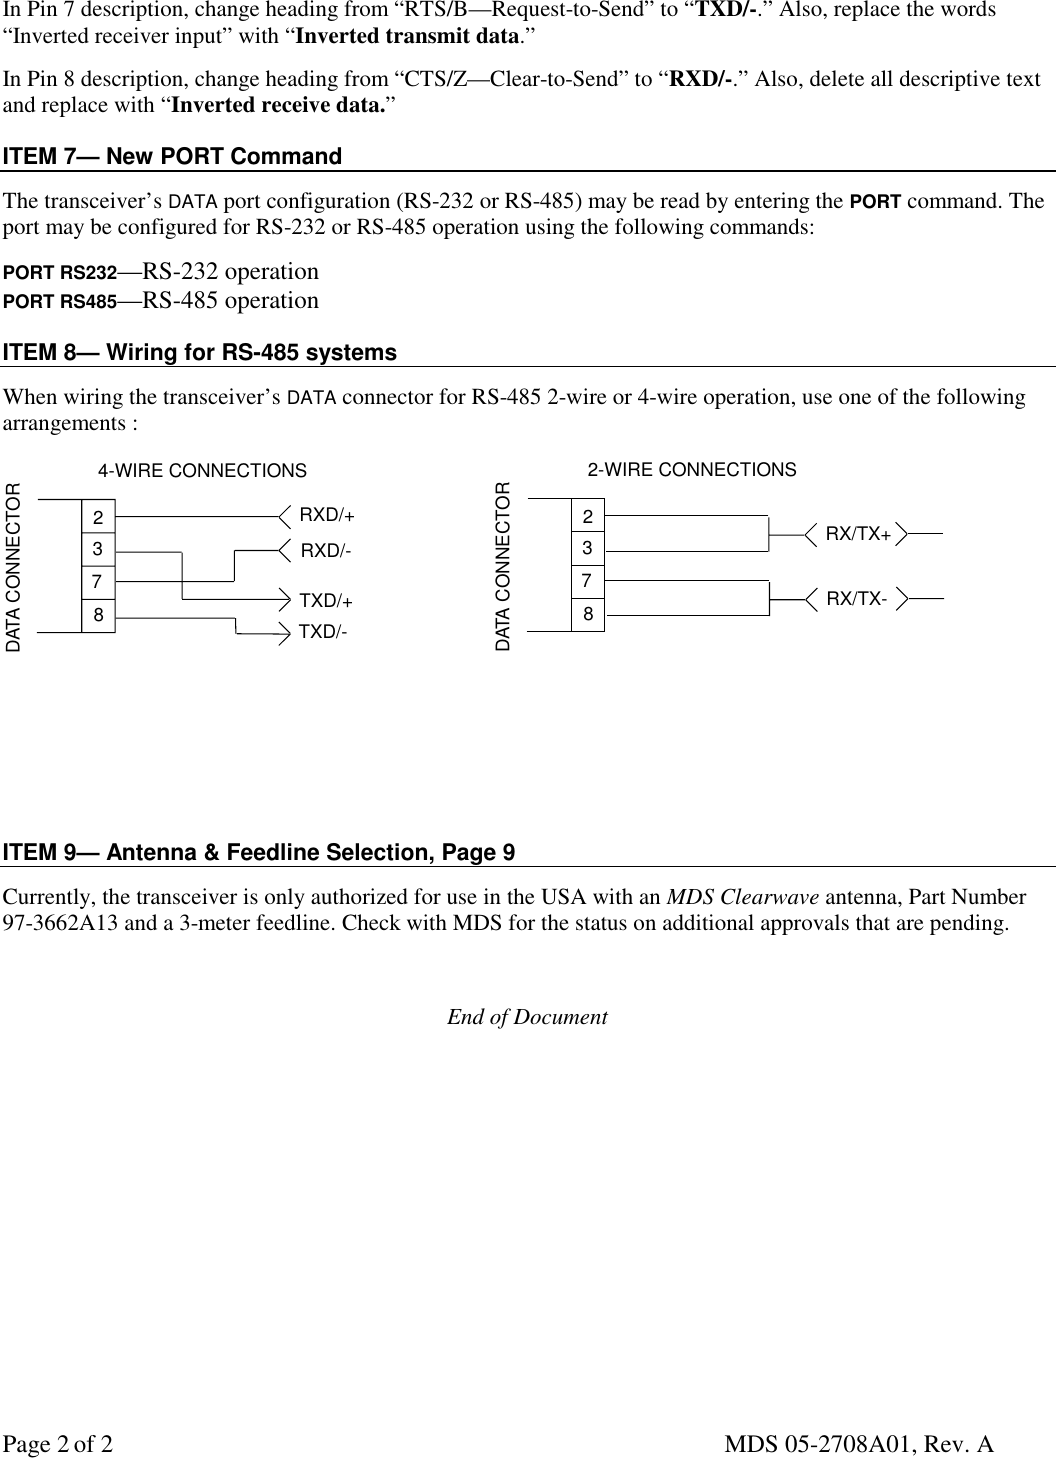 Page 2 of 2 MDS 05-2708A01, Rev. AIn Pin 7 description, change heading from “RTS/B—Request-to-Send” to “TXD/-.” Also, replace the words“Inverted receiver input” with “Inverted transmit data.”In Pin 8 description, change heading from “CTS/Z—Clear-to-Send” to “RXD/-.” Also, delete all descriptive textand replace with “Inverted receive data.”ITEM 7— New PORT CommandThe transceiver’s DATA port configuration (RS-232 or RS-485) may be read by entering the PORT command. Theport may be configured for RS-232 or RS-485 operation using the following commands:PORT RS232—RS-232 operationPORT RS485—RS-485 operationITEM 8— Wiring for RS-485 systemsWhen wiring the transceiver’s DATA connector for RS-485 2-wire or 4-wire operation, use one of the followingarrangements :TXD/+RXD/+237DATA CONNECTOR8RXD/-TXD/-4-WIRE CONNECTIONSRX/TX+237DATA CONNECTOR82-WIRE CONNECTIONSRX/TX-ITEM 9— Antenna &amp; Feedline Selection, Page 9Currently, the transceiver is only authorized for use in the USA with an MDS Clearwave antenna, Part Number97-3662A13 and a 3-meter feedline. Check with MDS for the status on additional approvals that are pending.End of Document